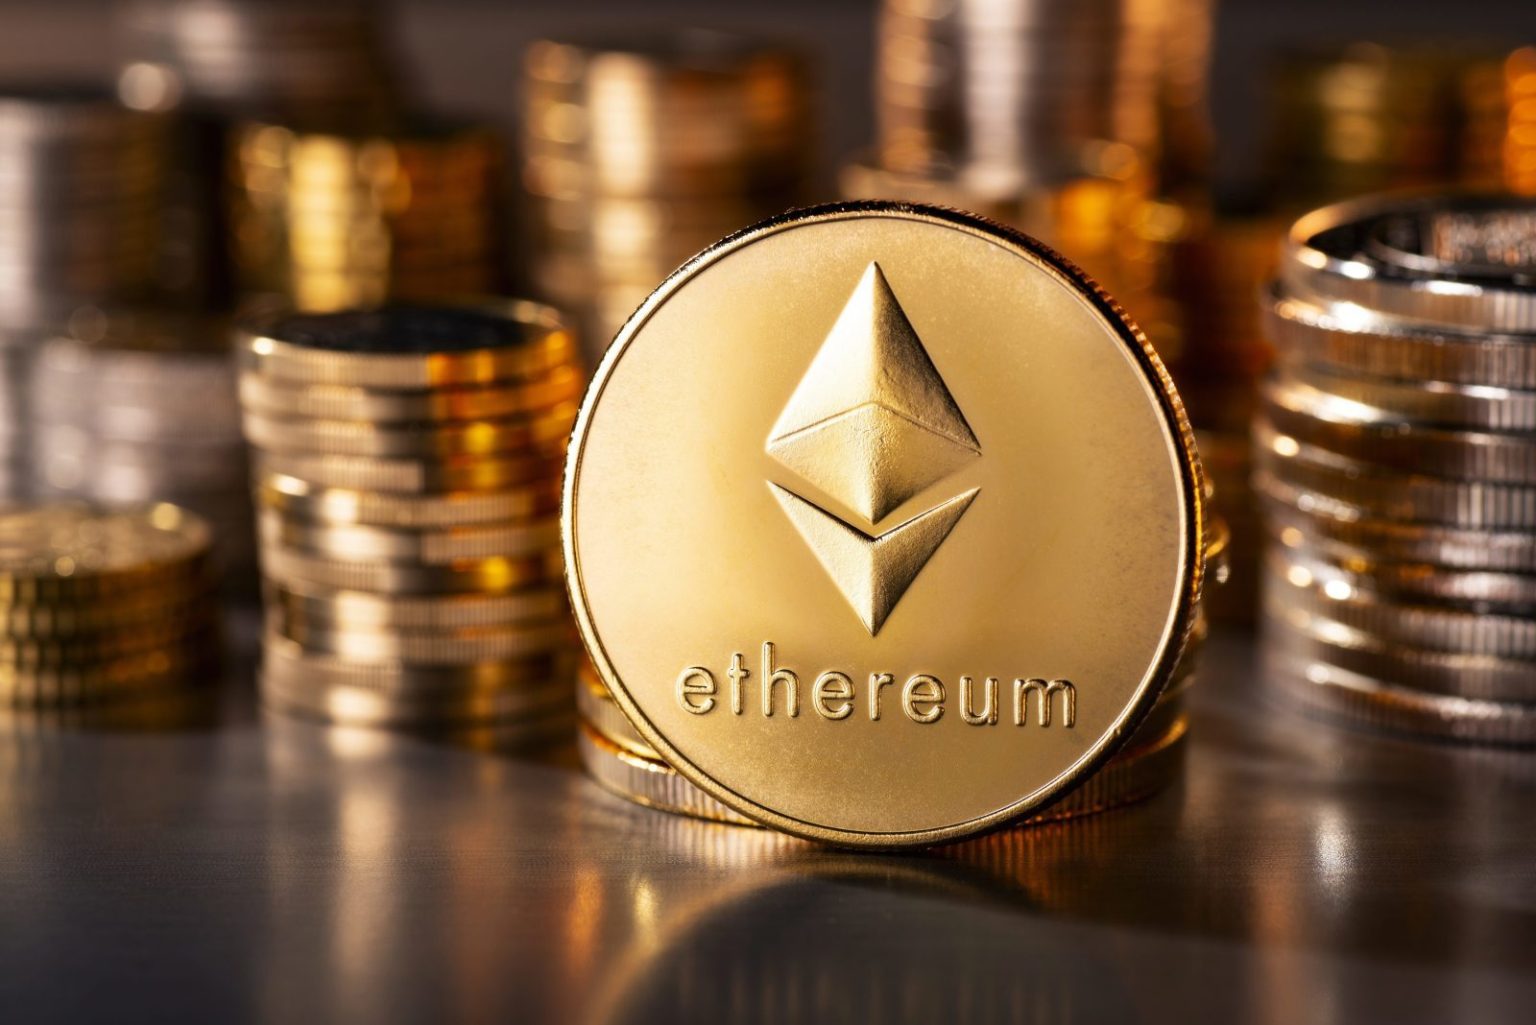 Ethereum Bullish Prediction: ETH Could Hit $6,000 By The End Of 2021